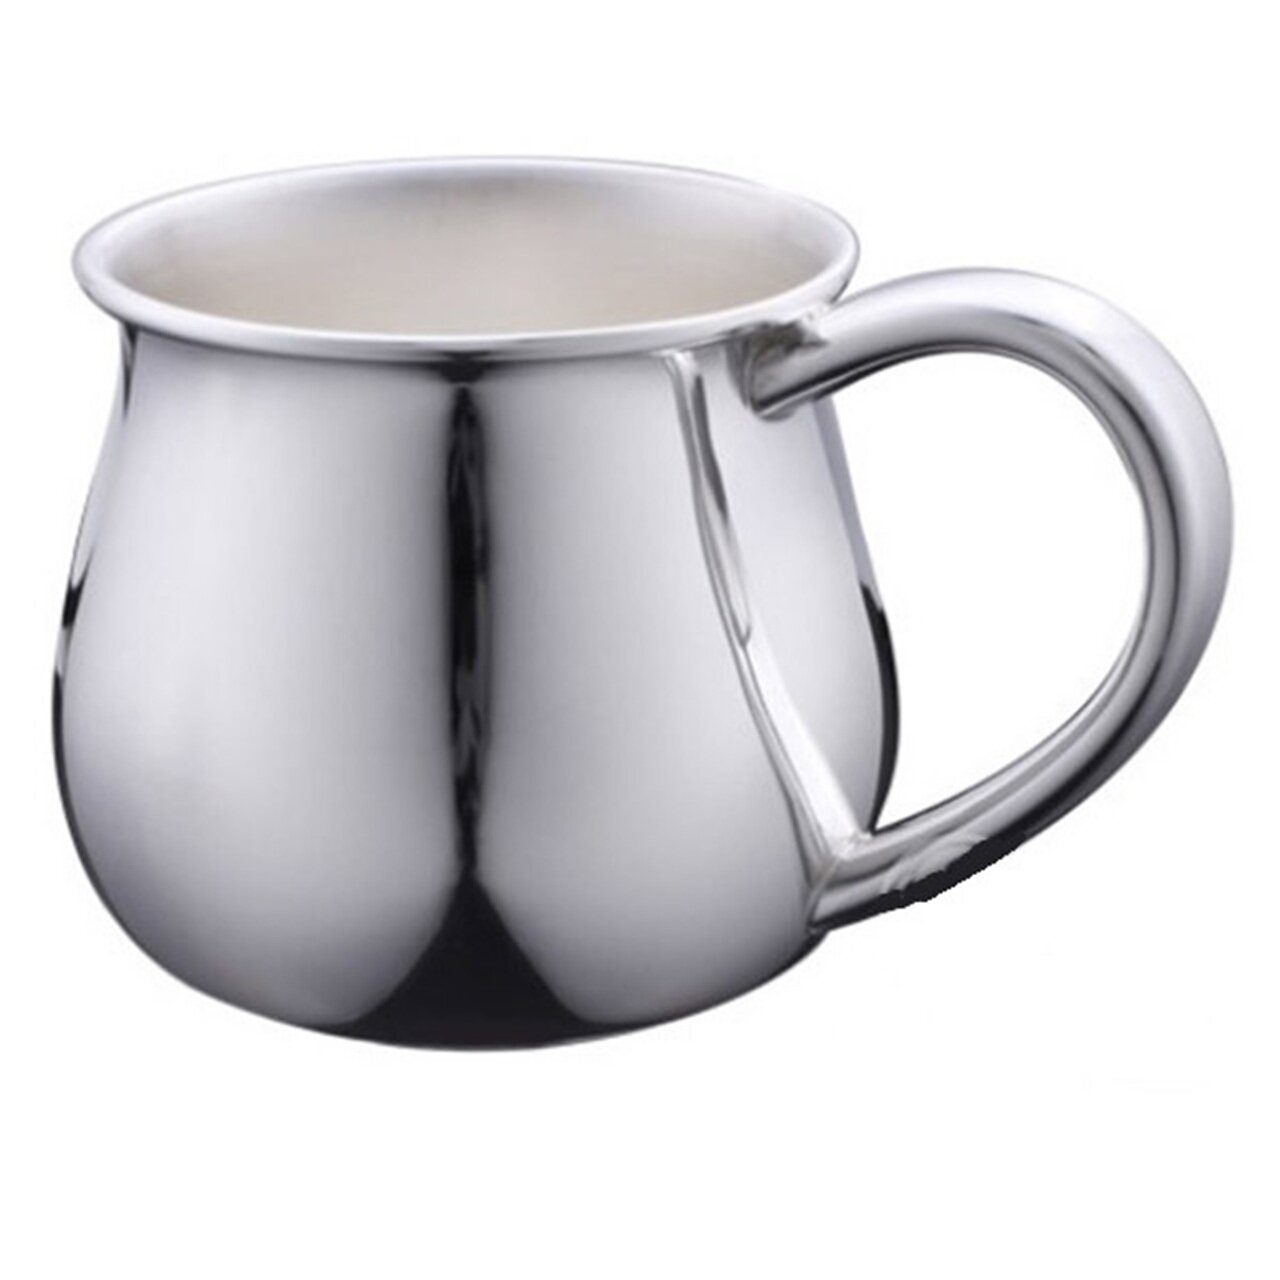 Cunill Bulged Baby Cup - Silverplated